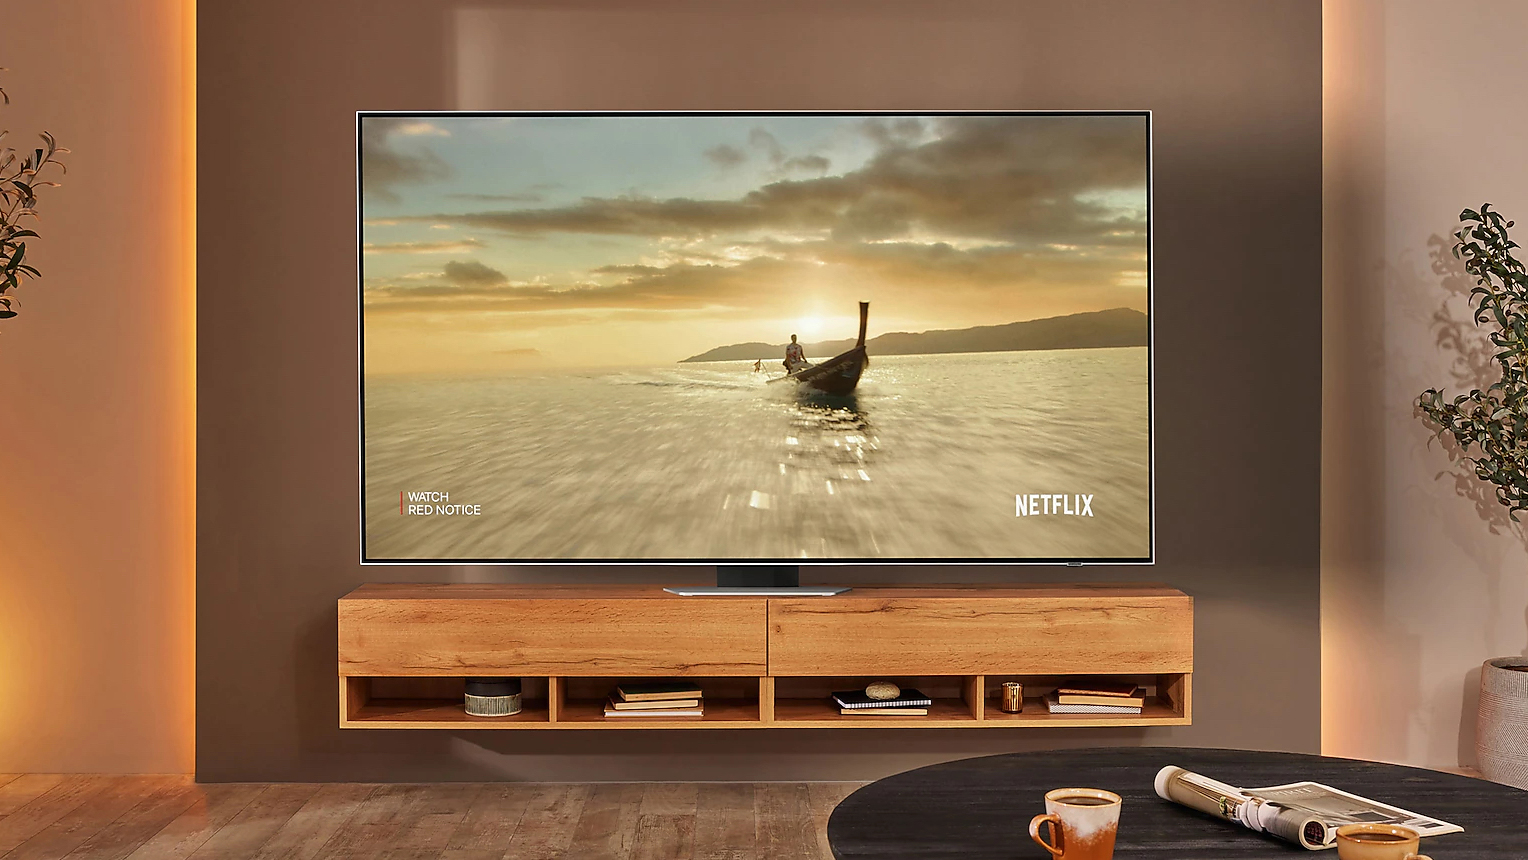 The Samsung QN85B in living room displaying an ocean scene